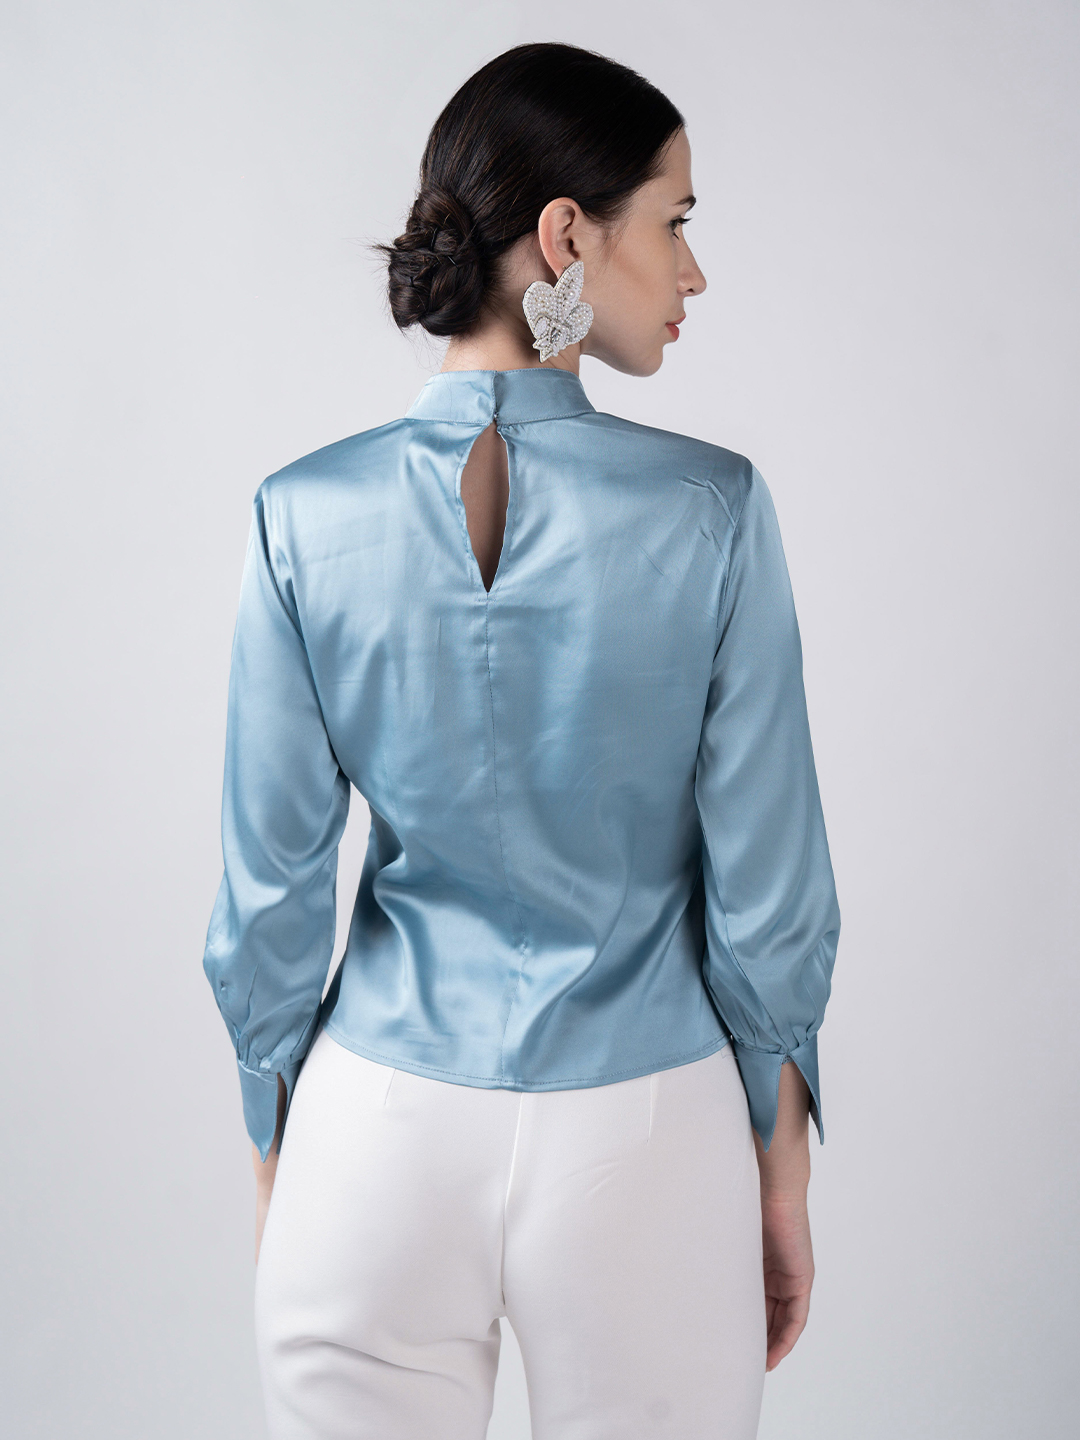 Gathered Collared Top Mint Blue - Back